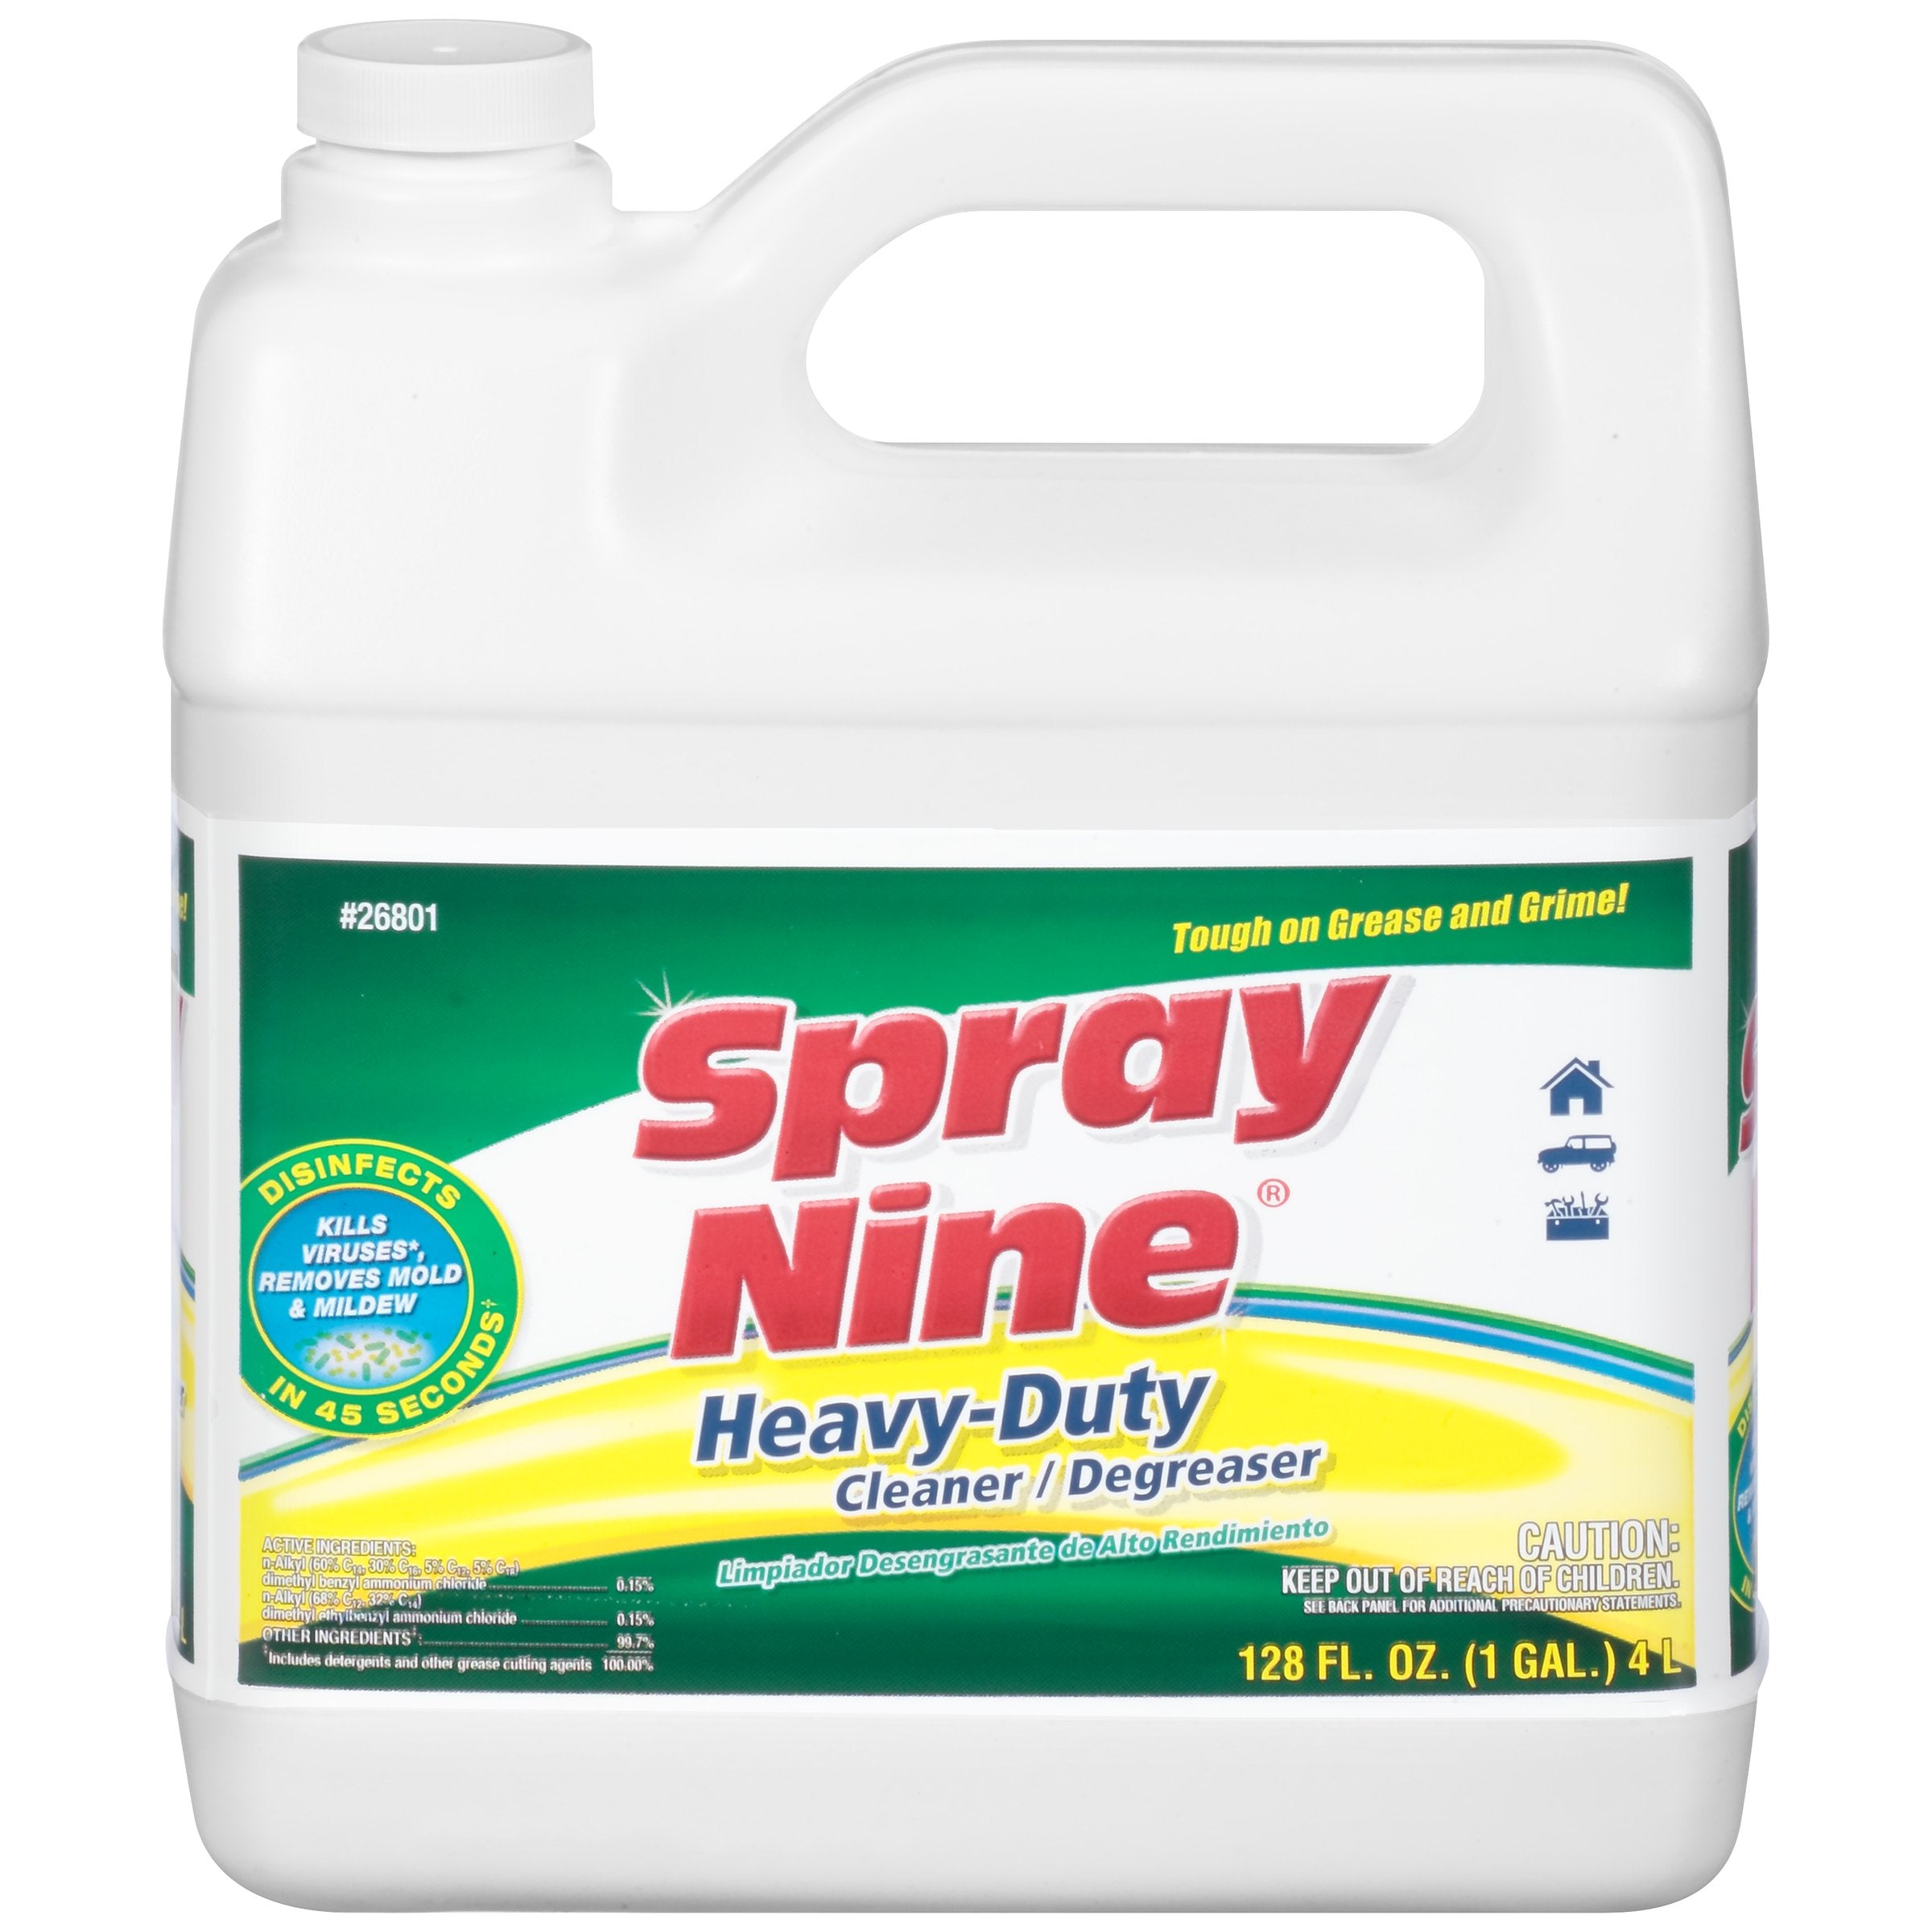 Spray Nine Permatex Heavy Duty Cleaner, Degreaser and Disinfectant, Multipurpose Cleaner for Common Automotive Shop, Home, Industrial, and Commercial Uses